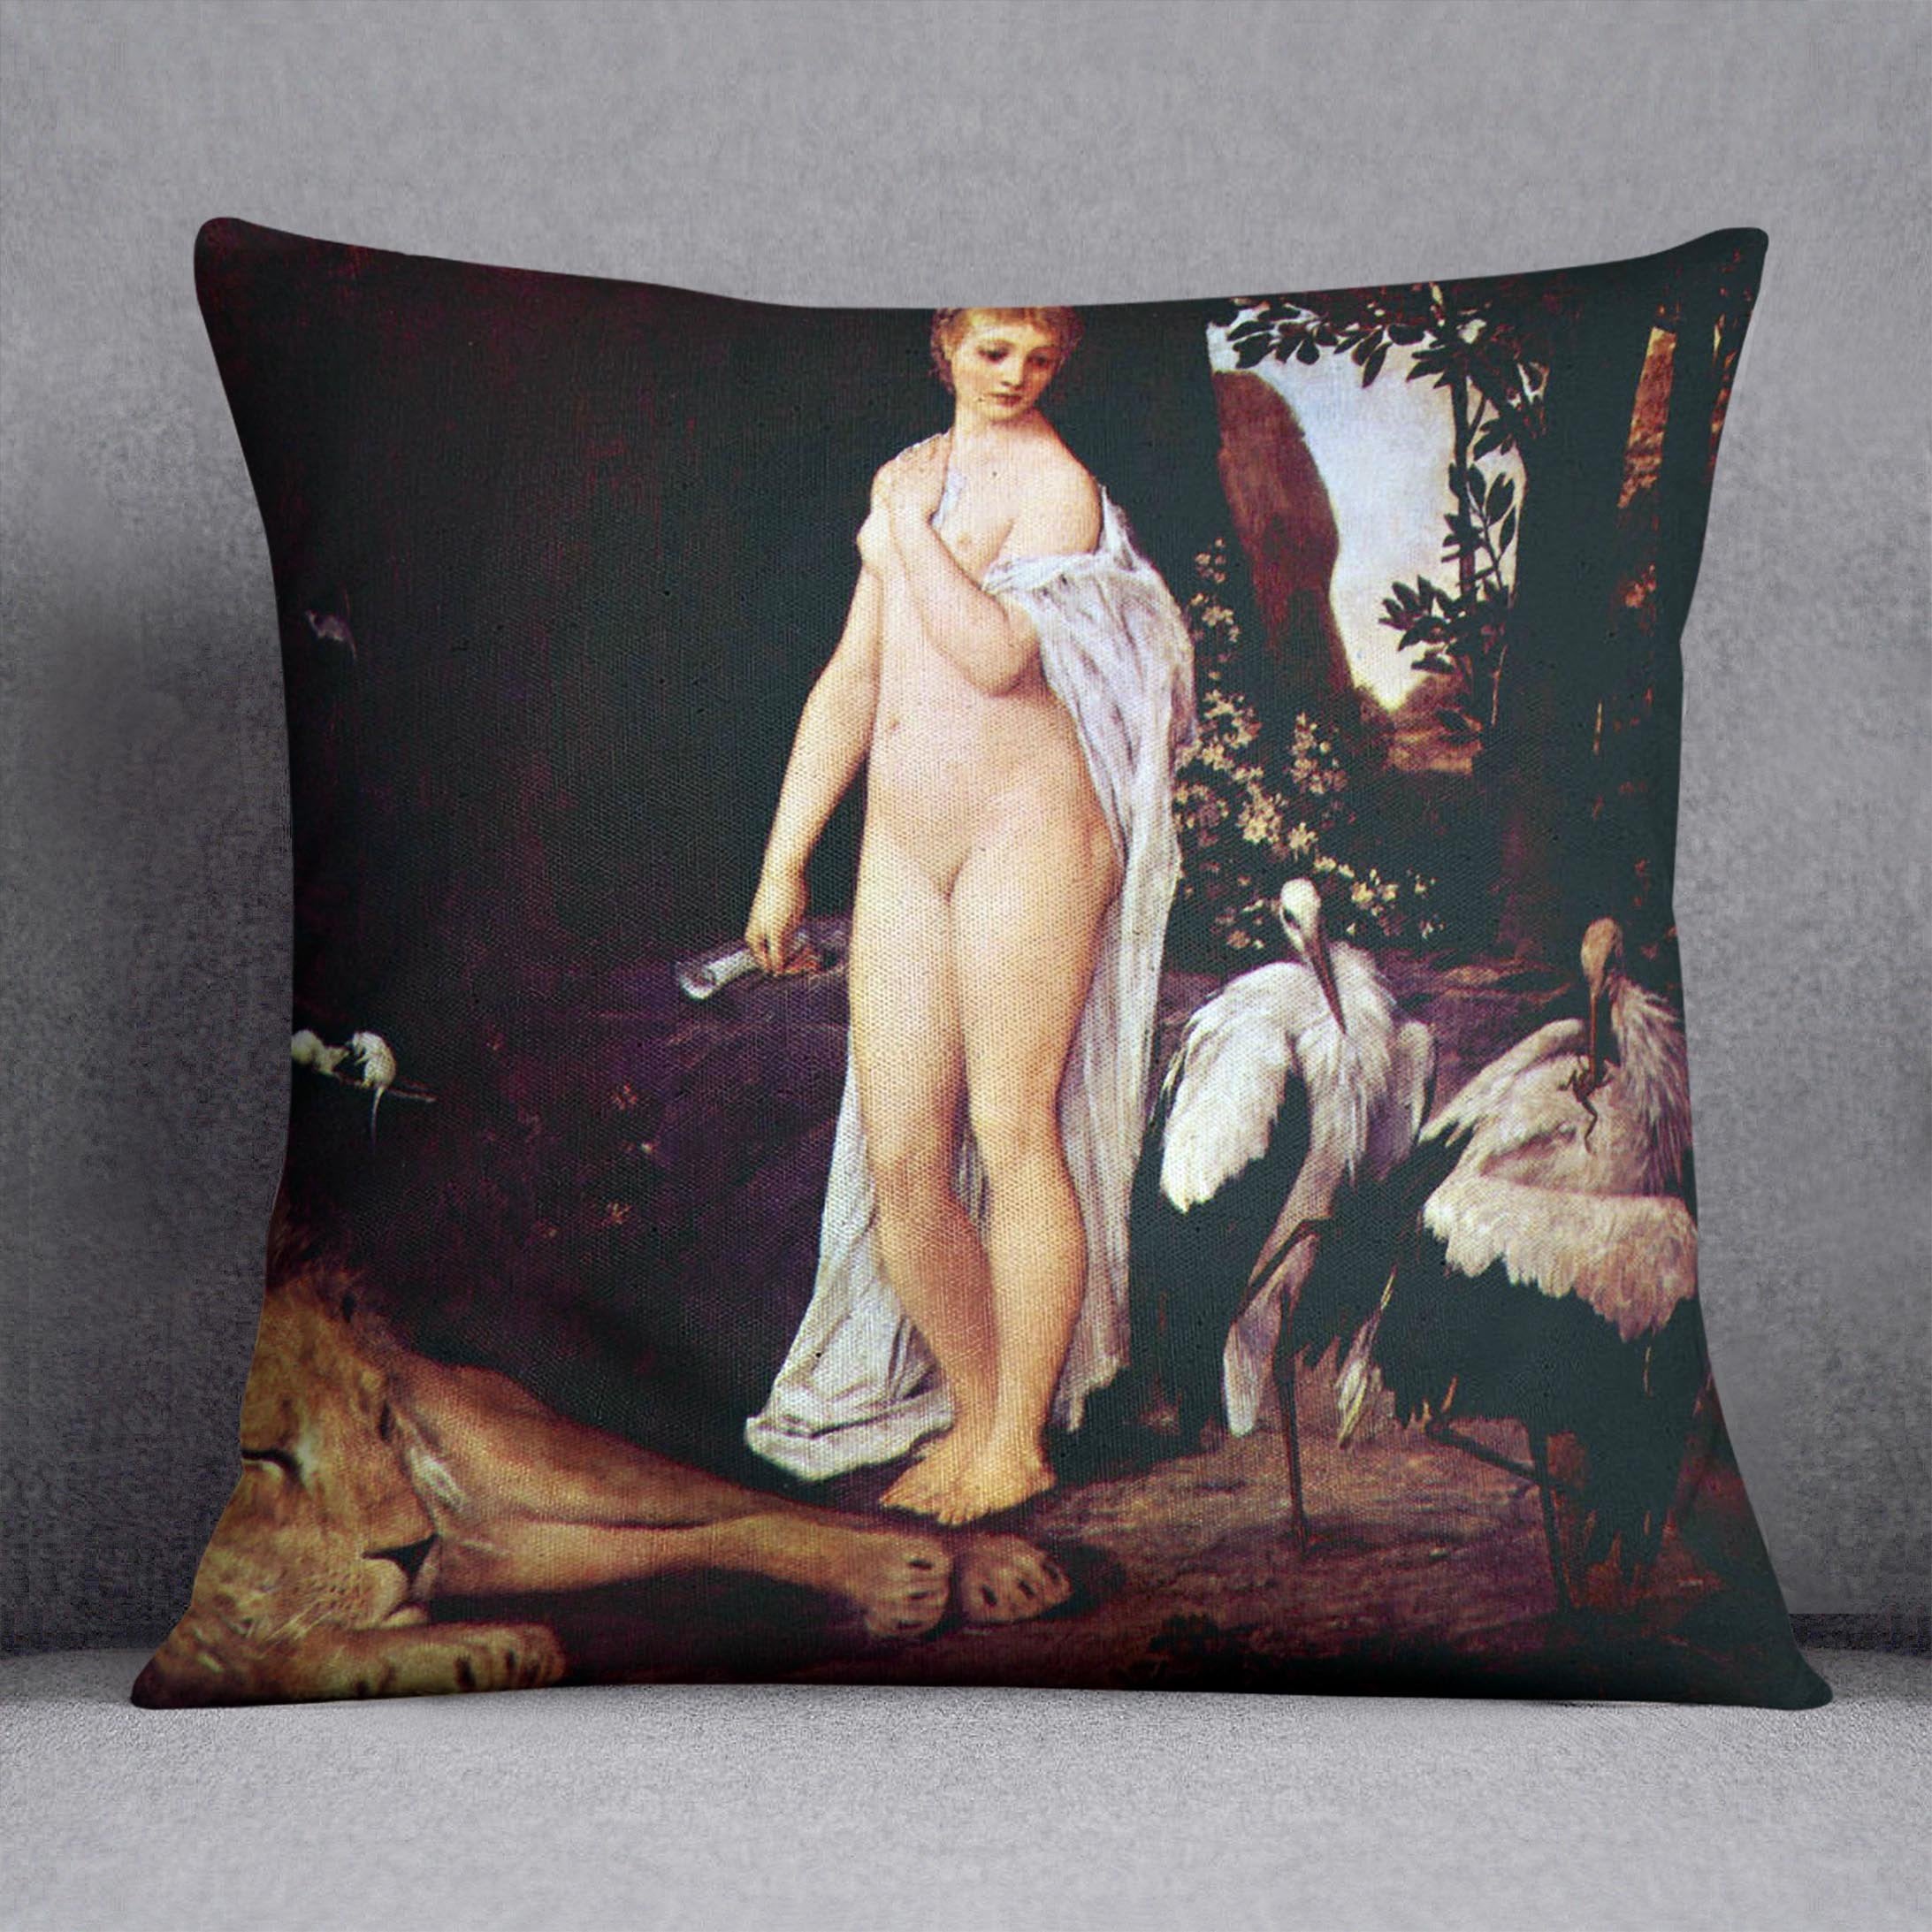 Fable by Klimt Throw Pillow